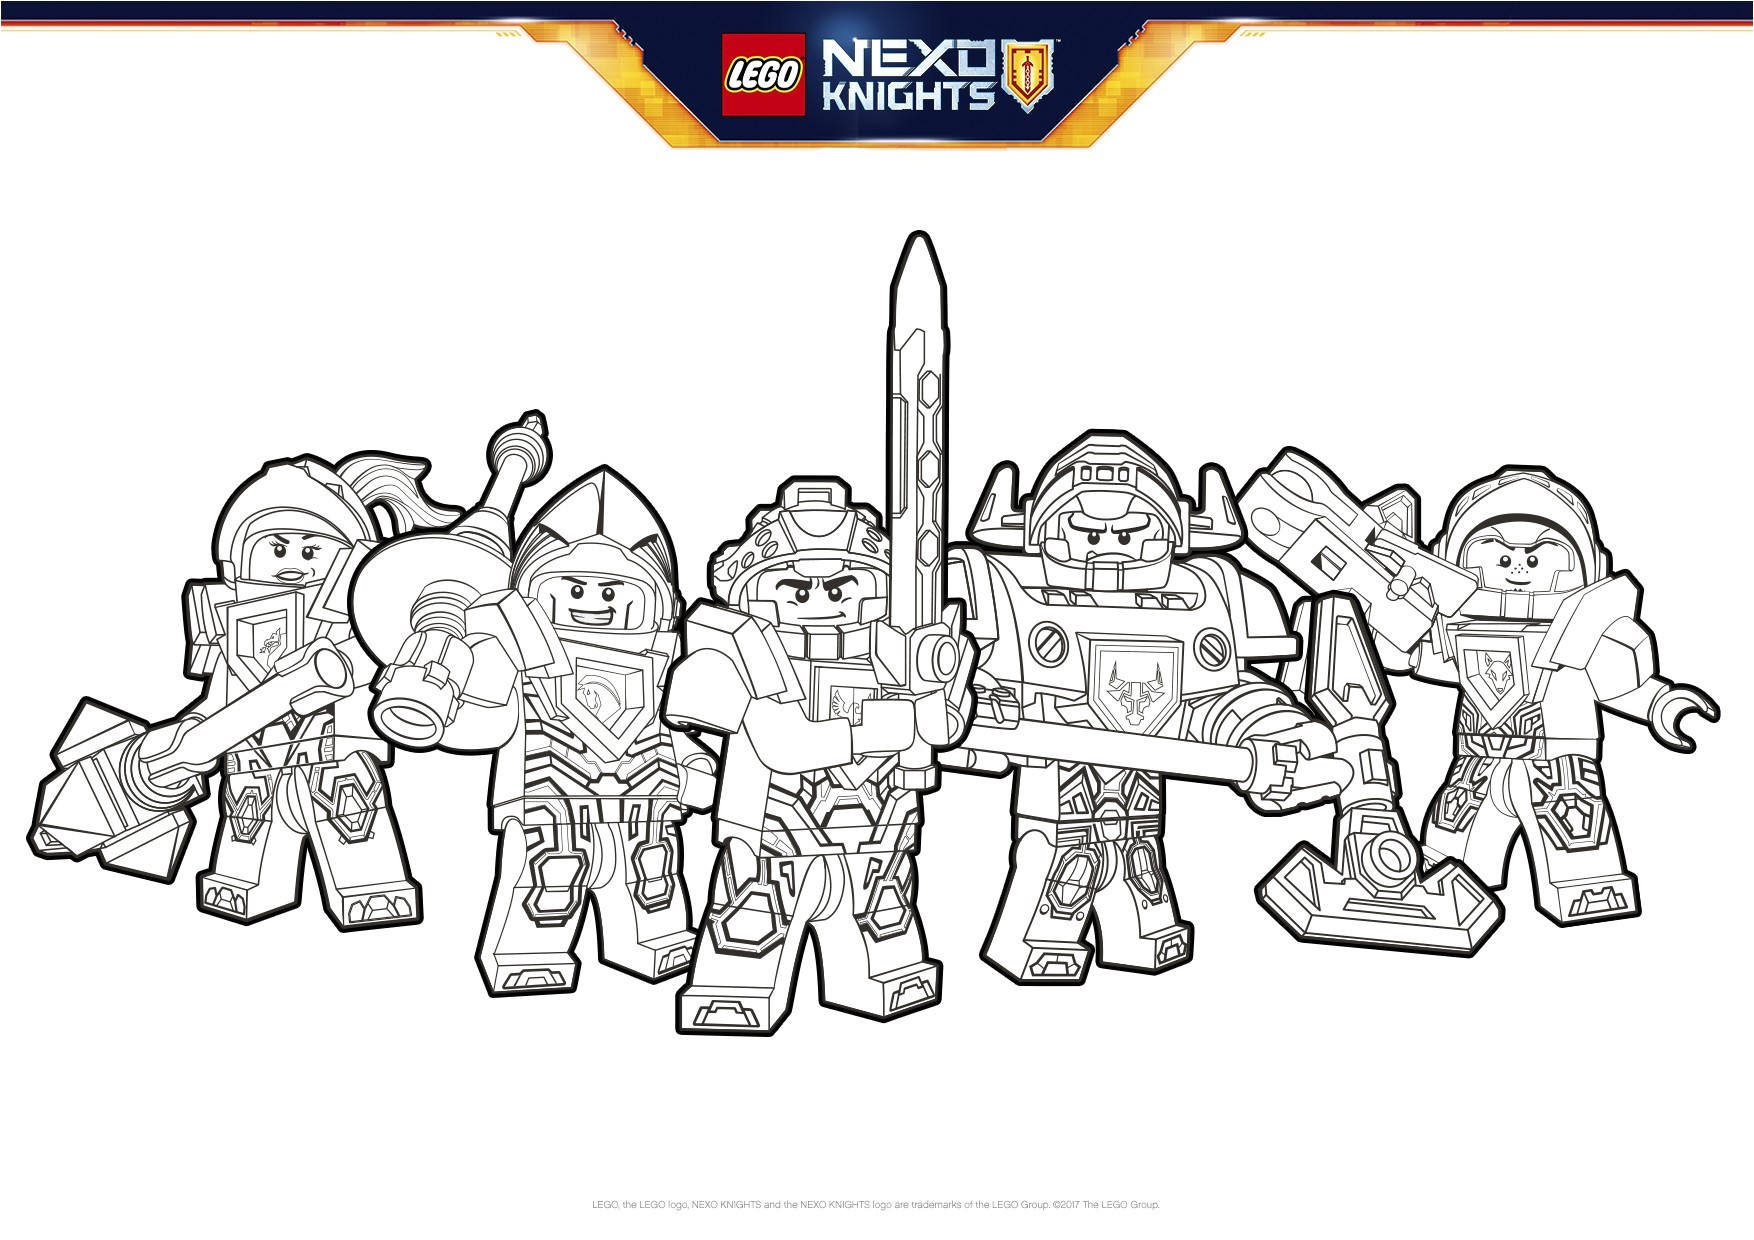 Colorful Lego Nexo Knights Coloring Pages To Print NEXO KNIGHTS Heroes Formation 02 LEGO